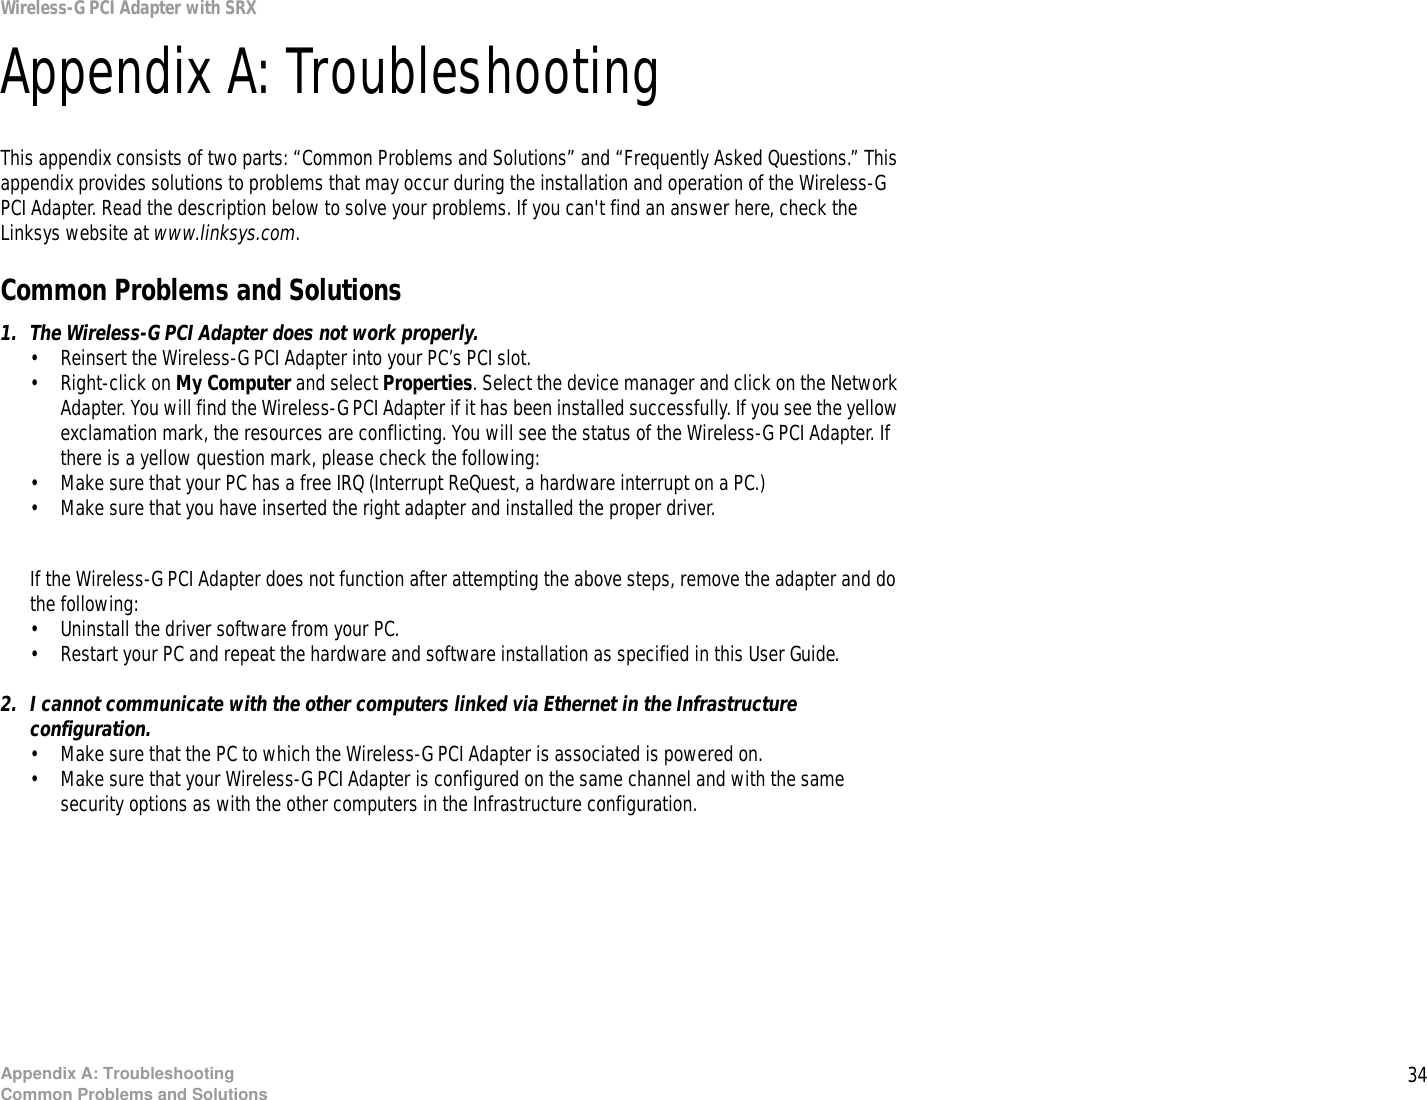 34Appendix A: TroubleshootingCommon Problems and SolutionsWireless-G PCI Adapter with SRXAppendix A: TroubleshootingThis appendix consists of two parts: “Common Problems and Solutions” and “Frequently Asked Questions.” This appendix provides solutions to problems that may occur during the installation and operation of the Wireless-G PCI Adapter. Read the description below to solve your problems. If you can&apos;t find an answer here, check the Linksys website at www.linksys.com.Common Problems and Solutions1. The Wireless-G PCI Adapter does not work properly.• Reinsert the Wireless-G PCI Adapter into your PC’s PCI slot.• Right-click on My Computer and select Properties. Select the device manager and click on the Network Adapter. You will find the Wireless-G PCI Adapter if it has been installed successfully. If you see the yellow exclamation mark, the resources are conflicting. You will see the status of the Wireless-G PCI Adapter. If there is a yellow question mark, please check the following:• Make sure that your PC has a free IRQ (Interrupt ReQuest, a hardware interrupt on a PC.) • Make sure that you have inserted the right adapter and installed the proper driver.If the Wireless-G PCI Adapter does not function after attempting the above steps, remove the adapter and do the following:• Uninstall the driver software from your PC.• Restart your PC and repeat the hardware and software installation as specified in this User Guide.2. I cannot communicate with the other computers linked via Ethernet in the Infrastructure configuration.• Make sure that the PC to which the Wireless-G PCI Adapter is associated is powered on.• Make sure that your Wireless-G PCI Adapter is configured on the same channel and with the same security options as with the other computers in the Infrastructure configuration.